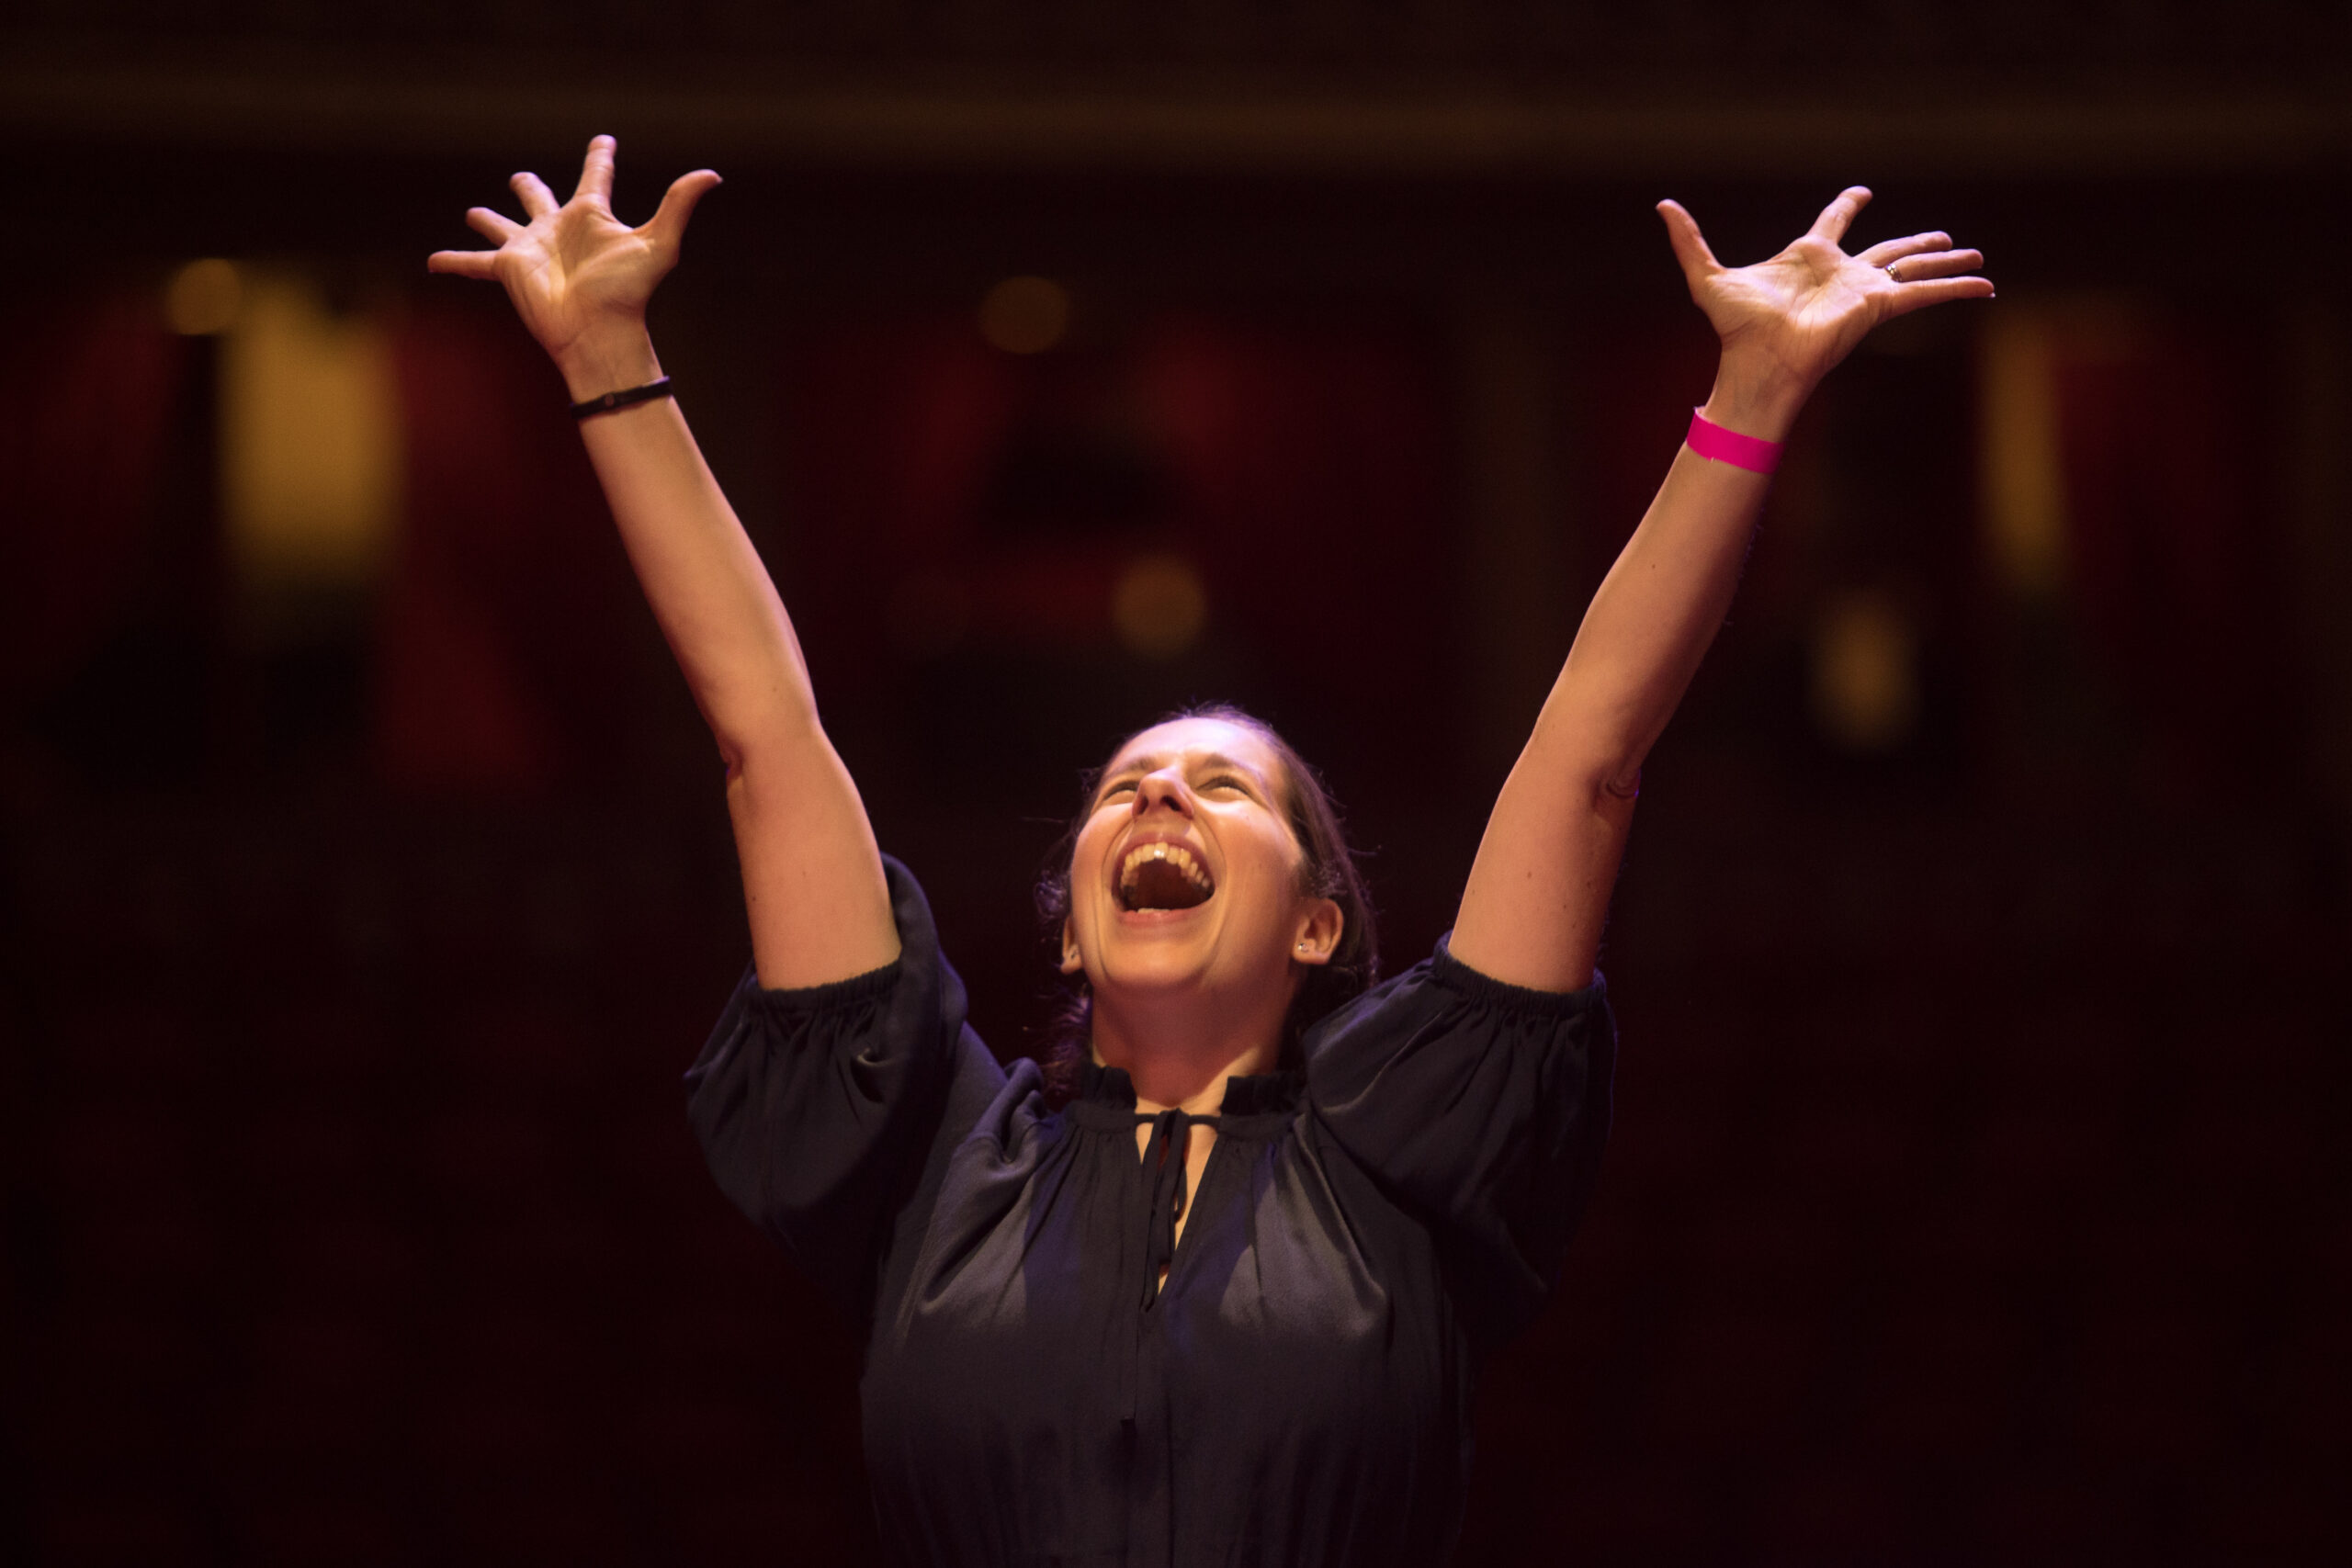 Rachel Staunton with her arms up, looking up with a joyful expression on her face, wearing black concert uniform